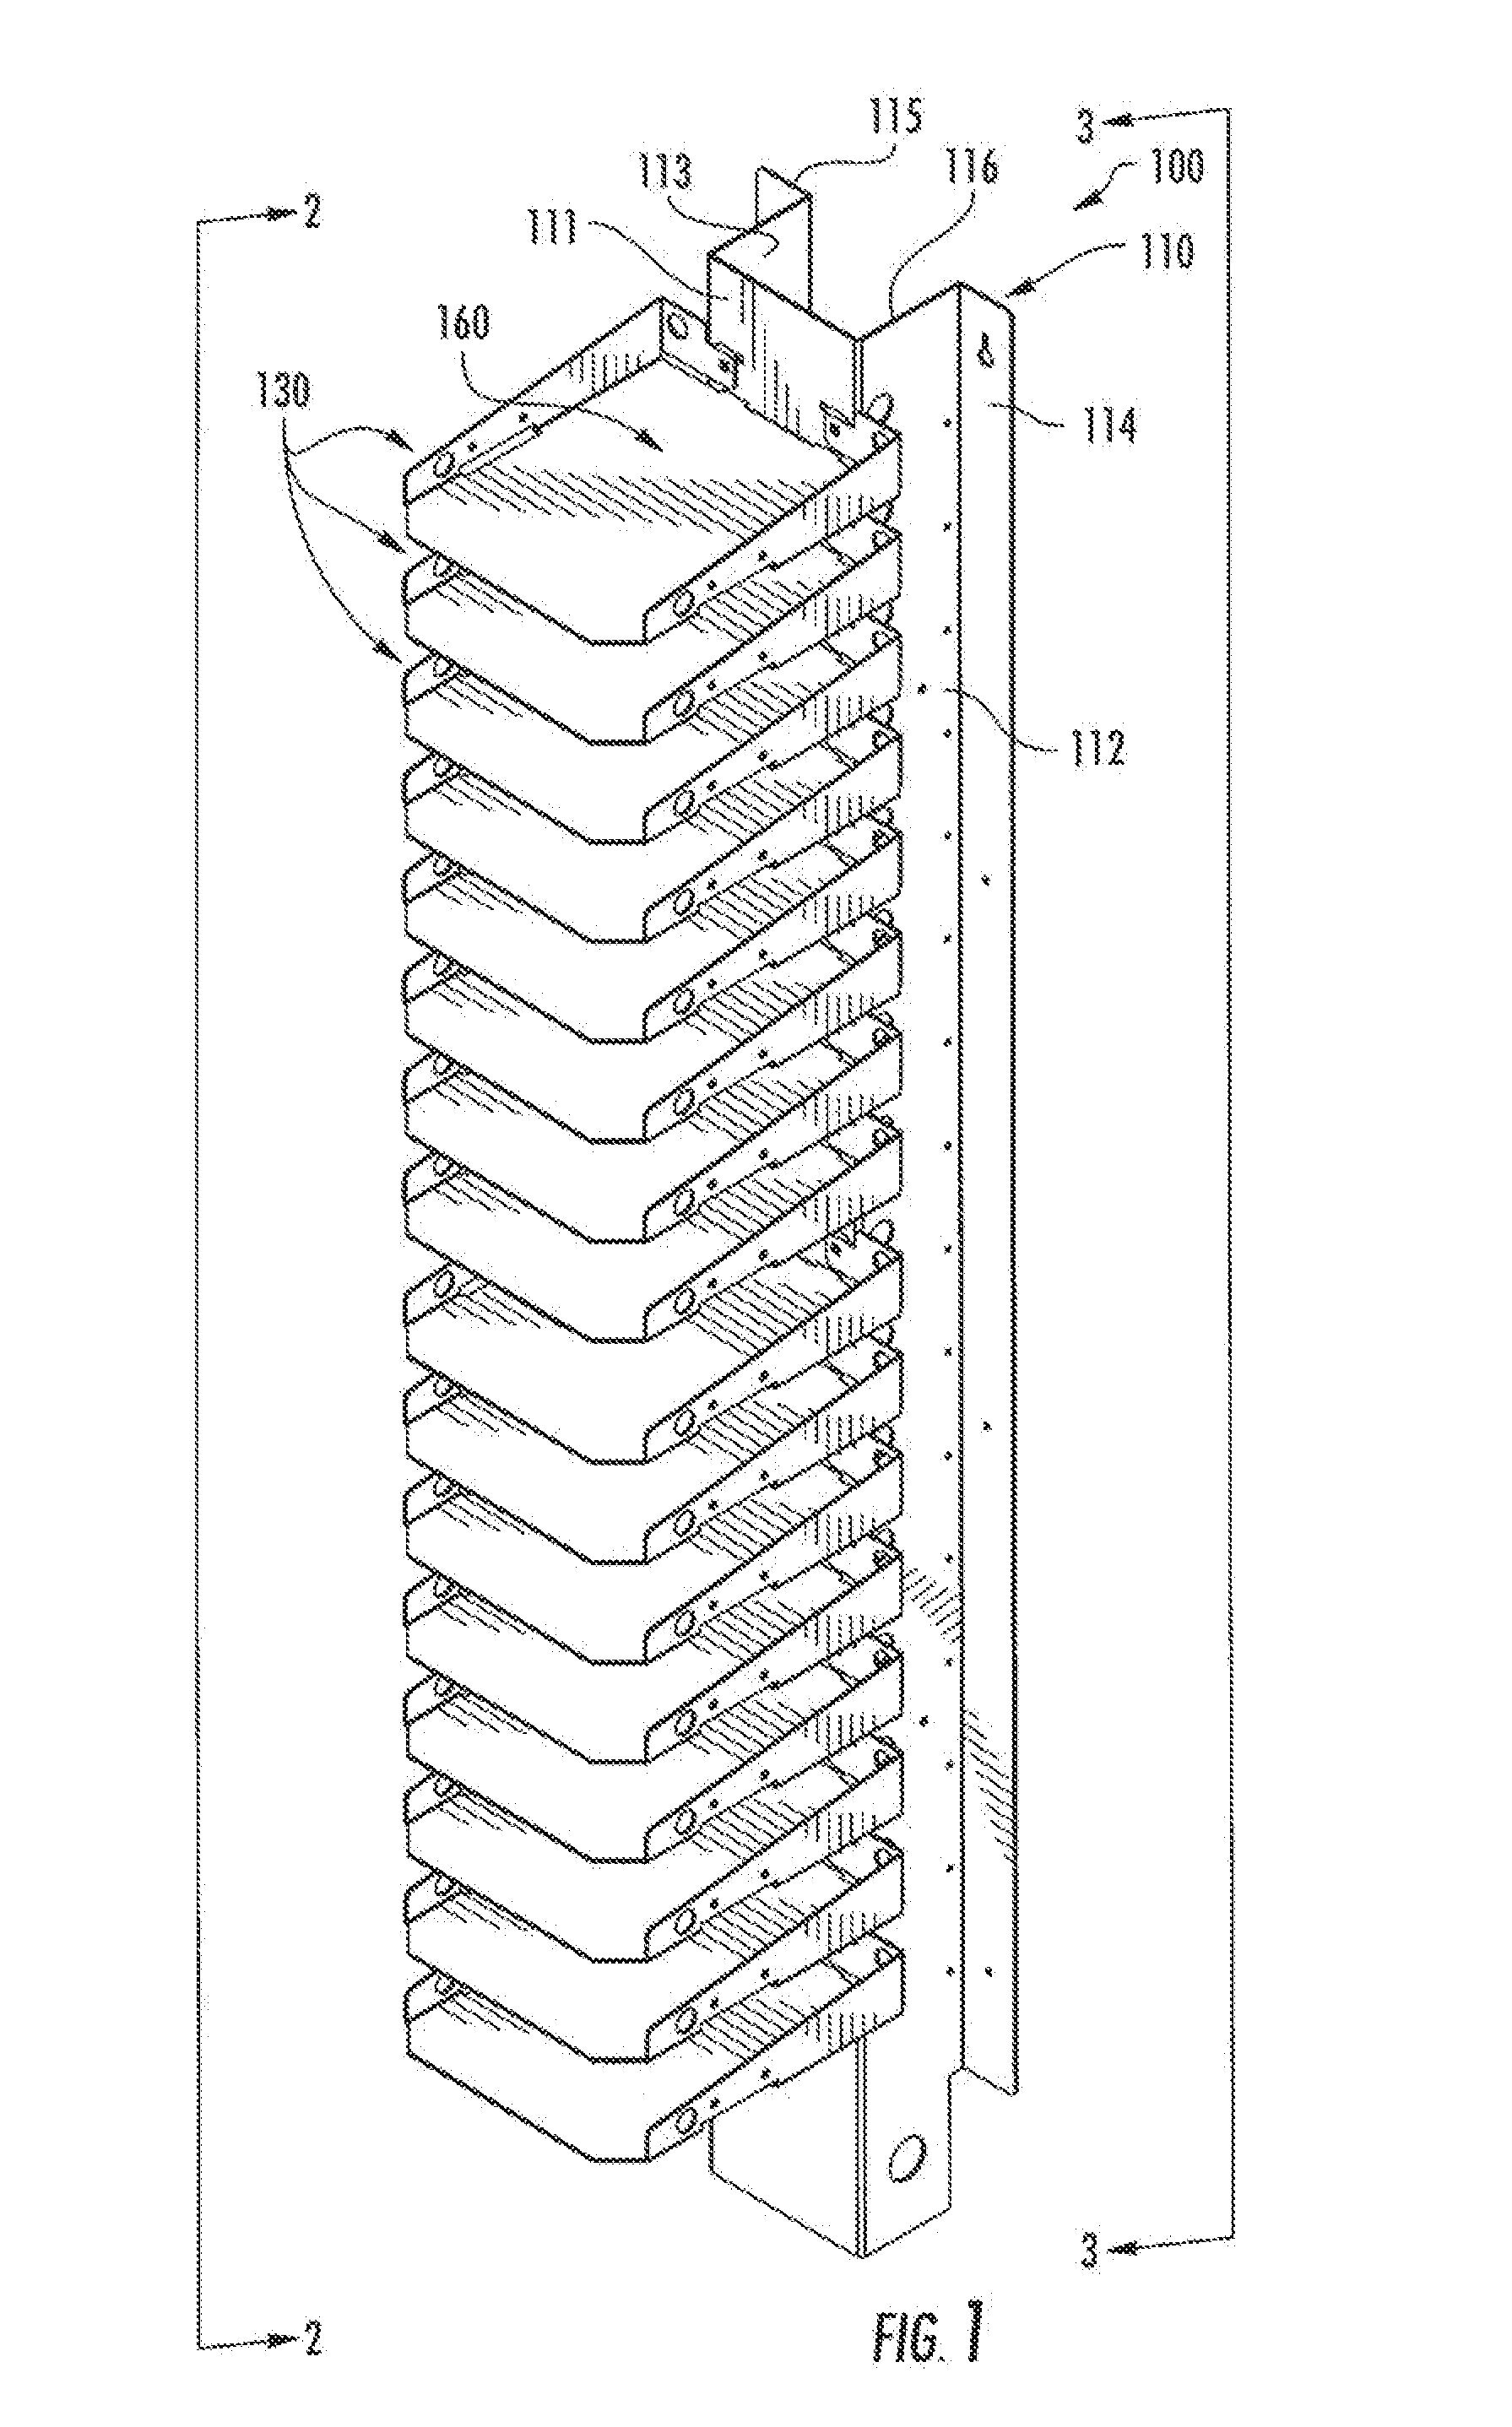 Improved storage and charging station system for portable electronic devices